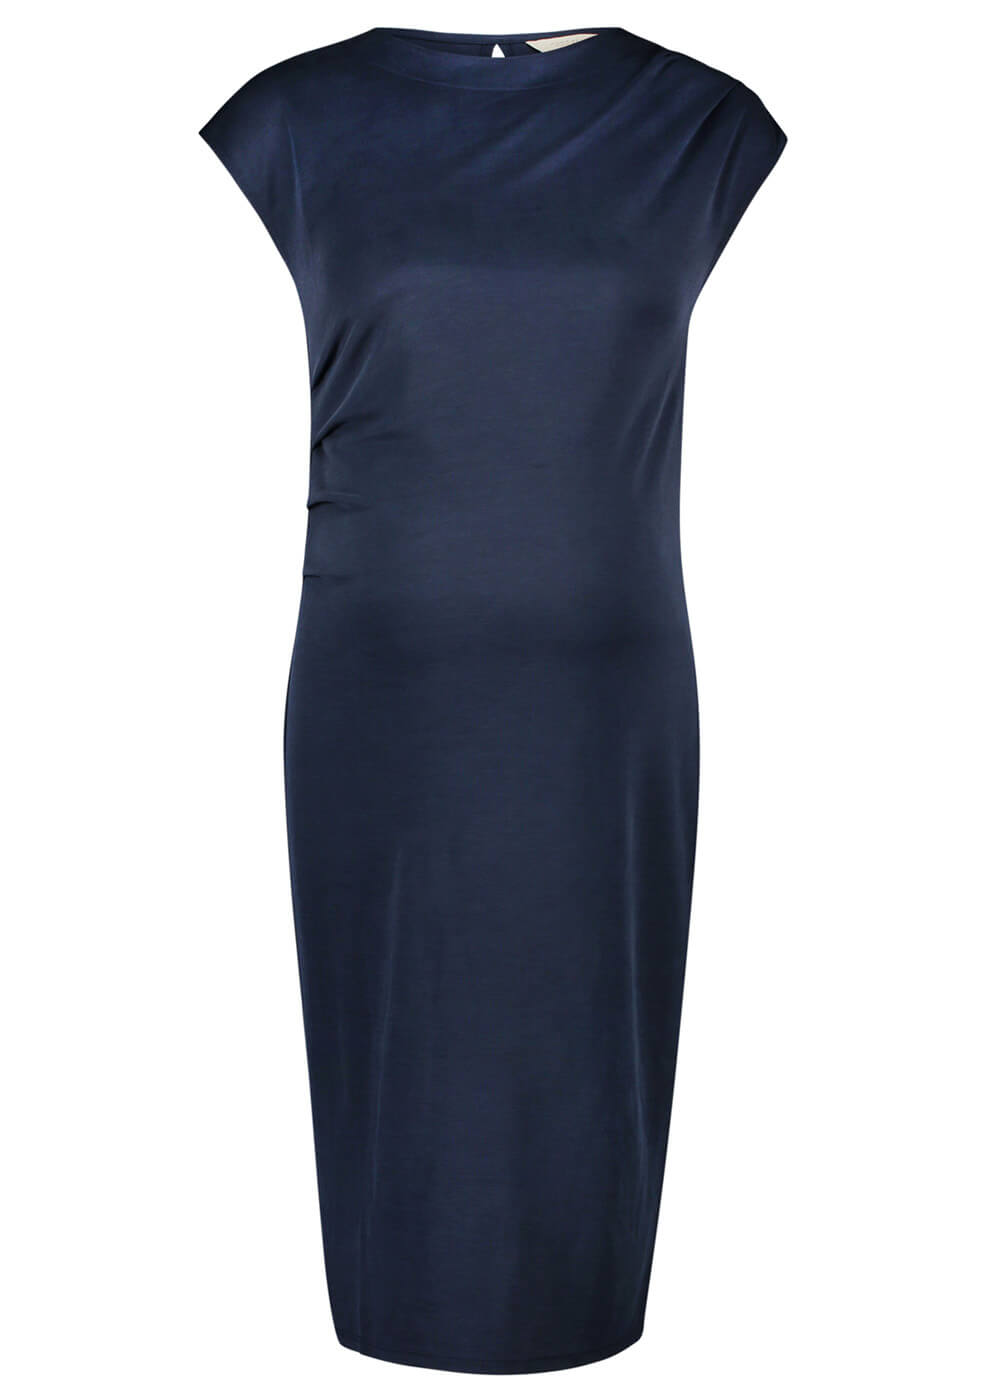 Annefleur Maternity Dress in Navy by Noppies